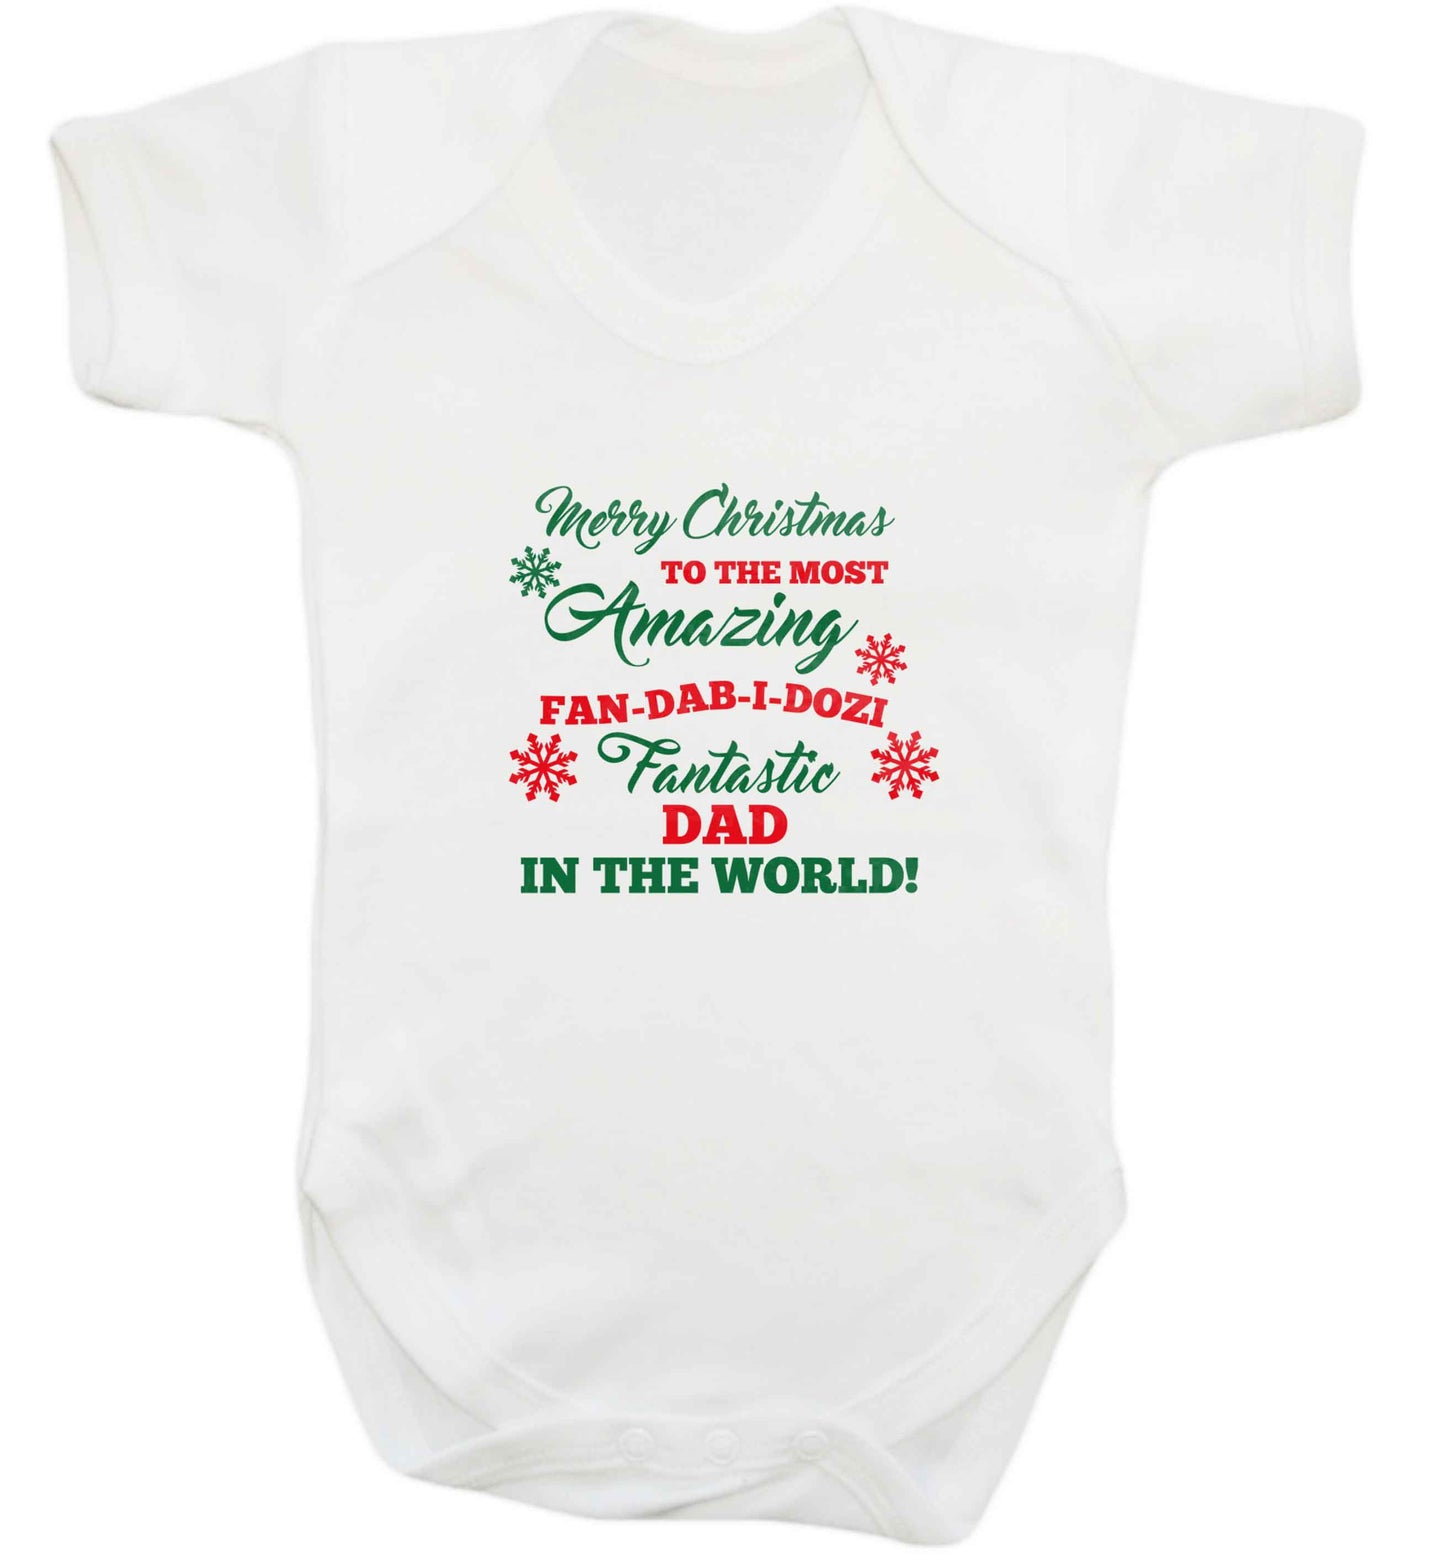 Merry Christmas to the most amazing fan-dab-i-dozi fantasic Dad in the world baby vest white 18-24 months